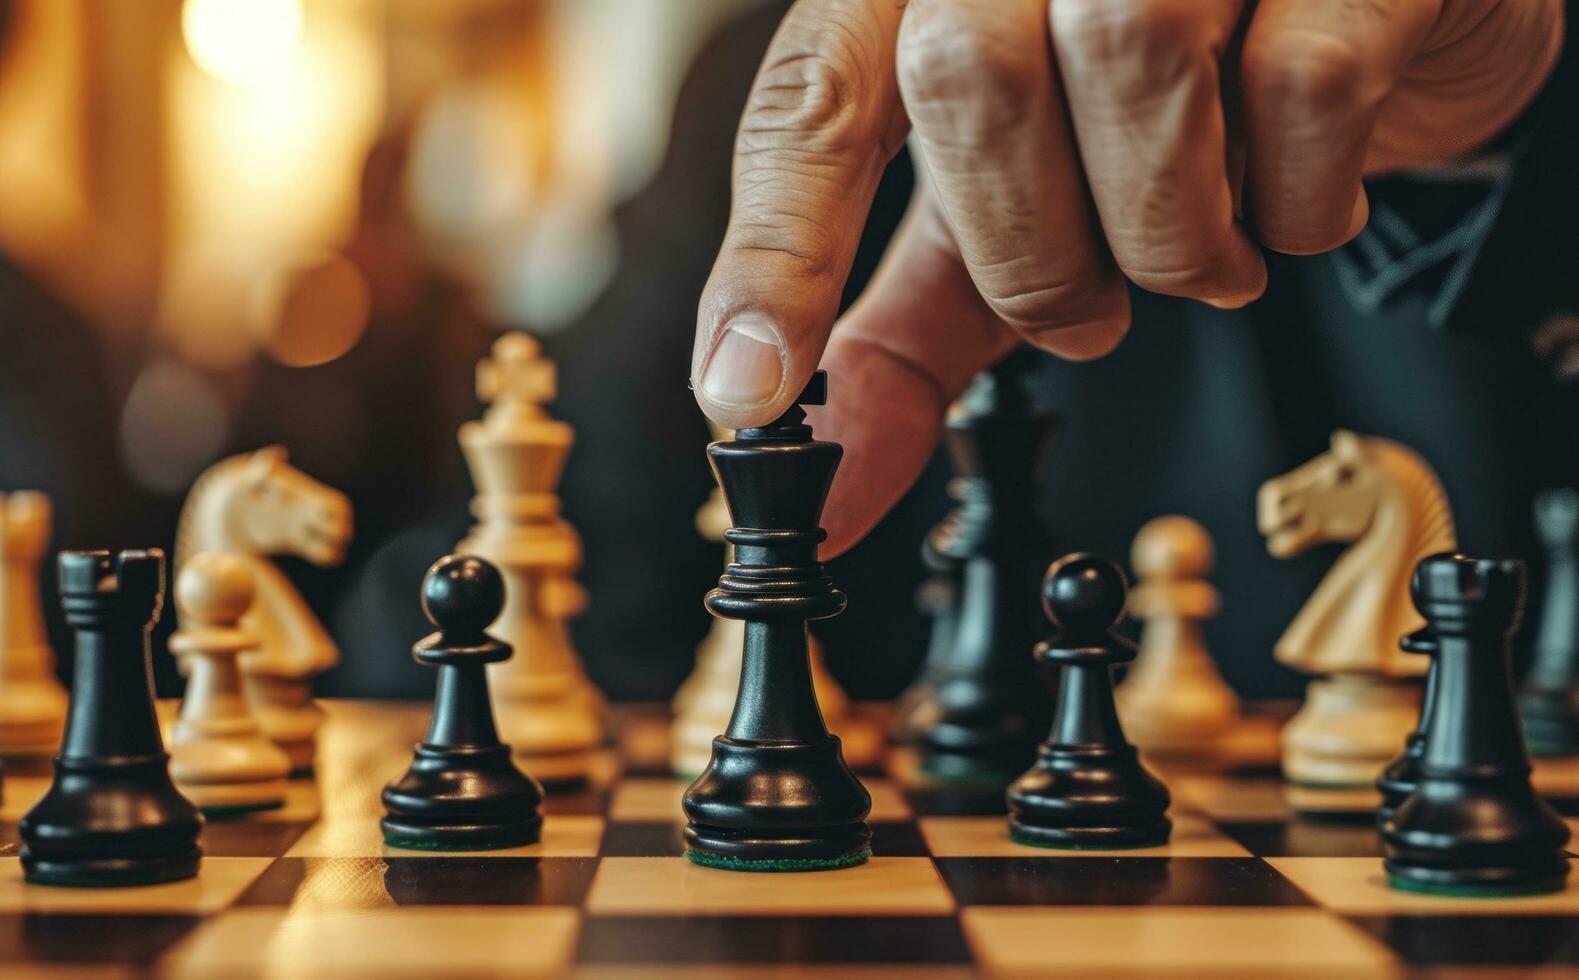 AI generated a man's hand on a chess board photo